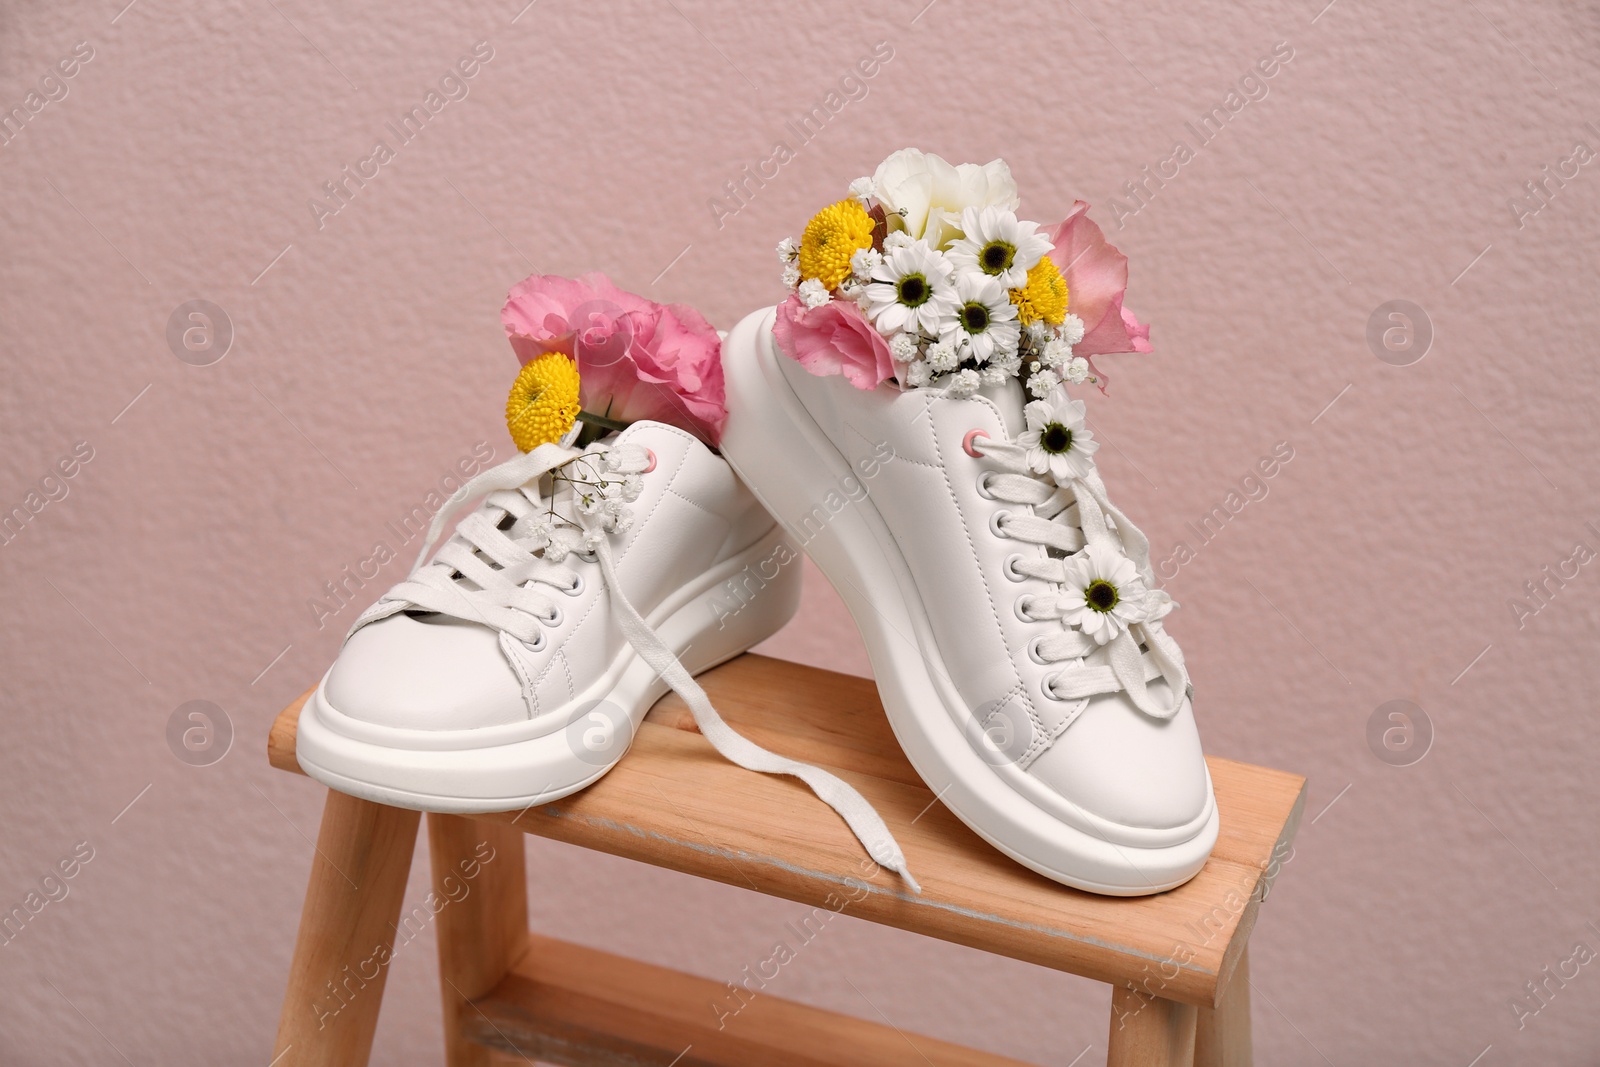 Photo of Shoes with beautiful flowers on wooden stand against pale pink background